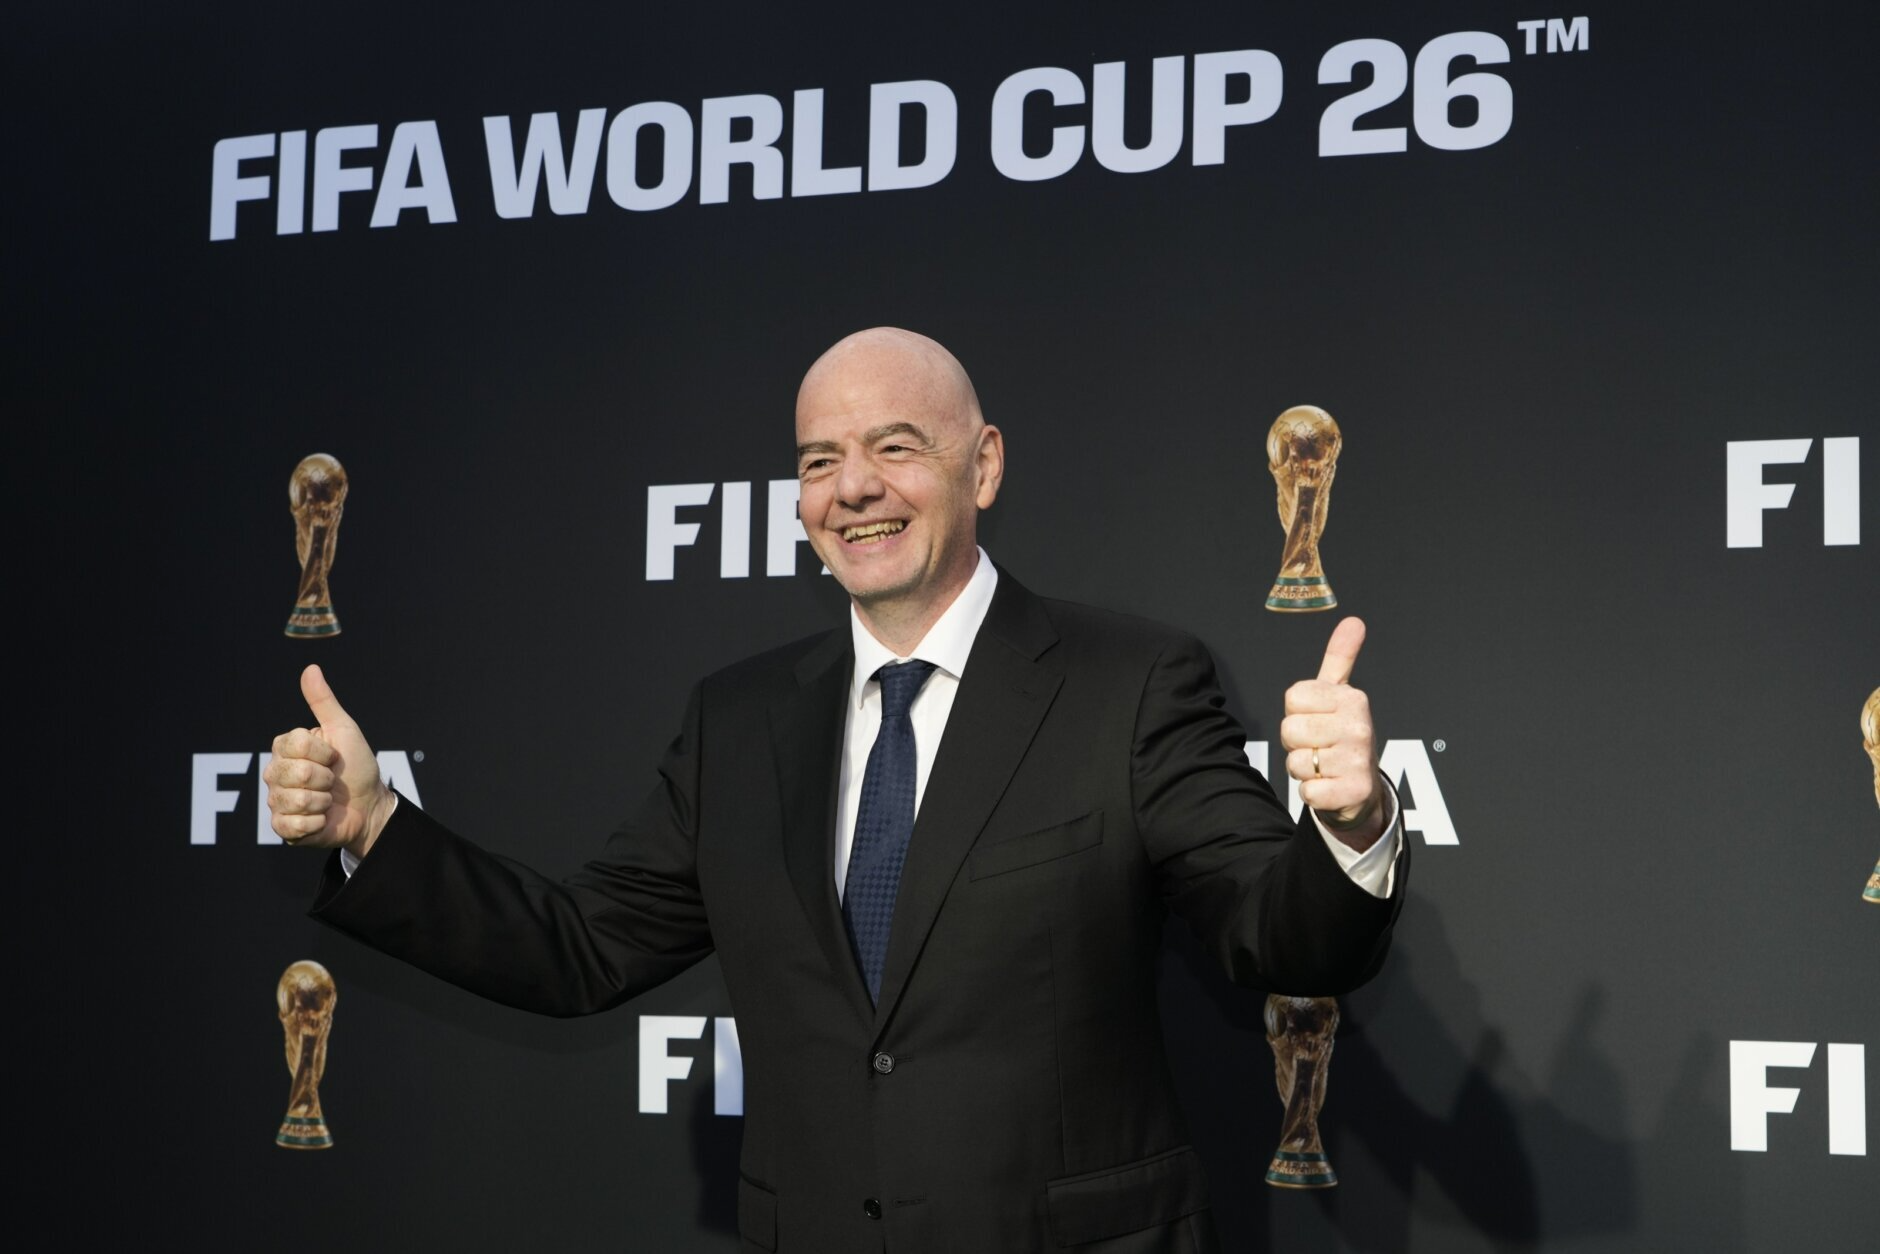 FIFA Head Infantino Presents Official Slogan for FIFA World Cup 2026